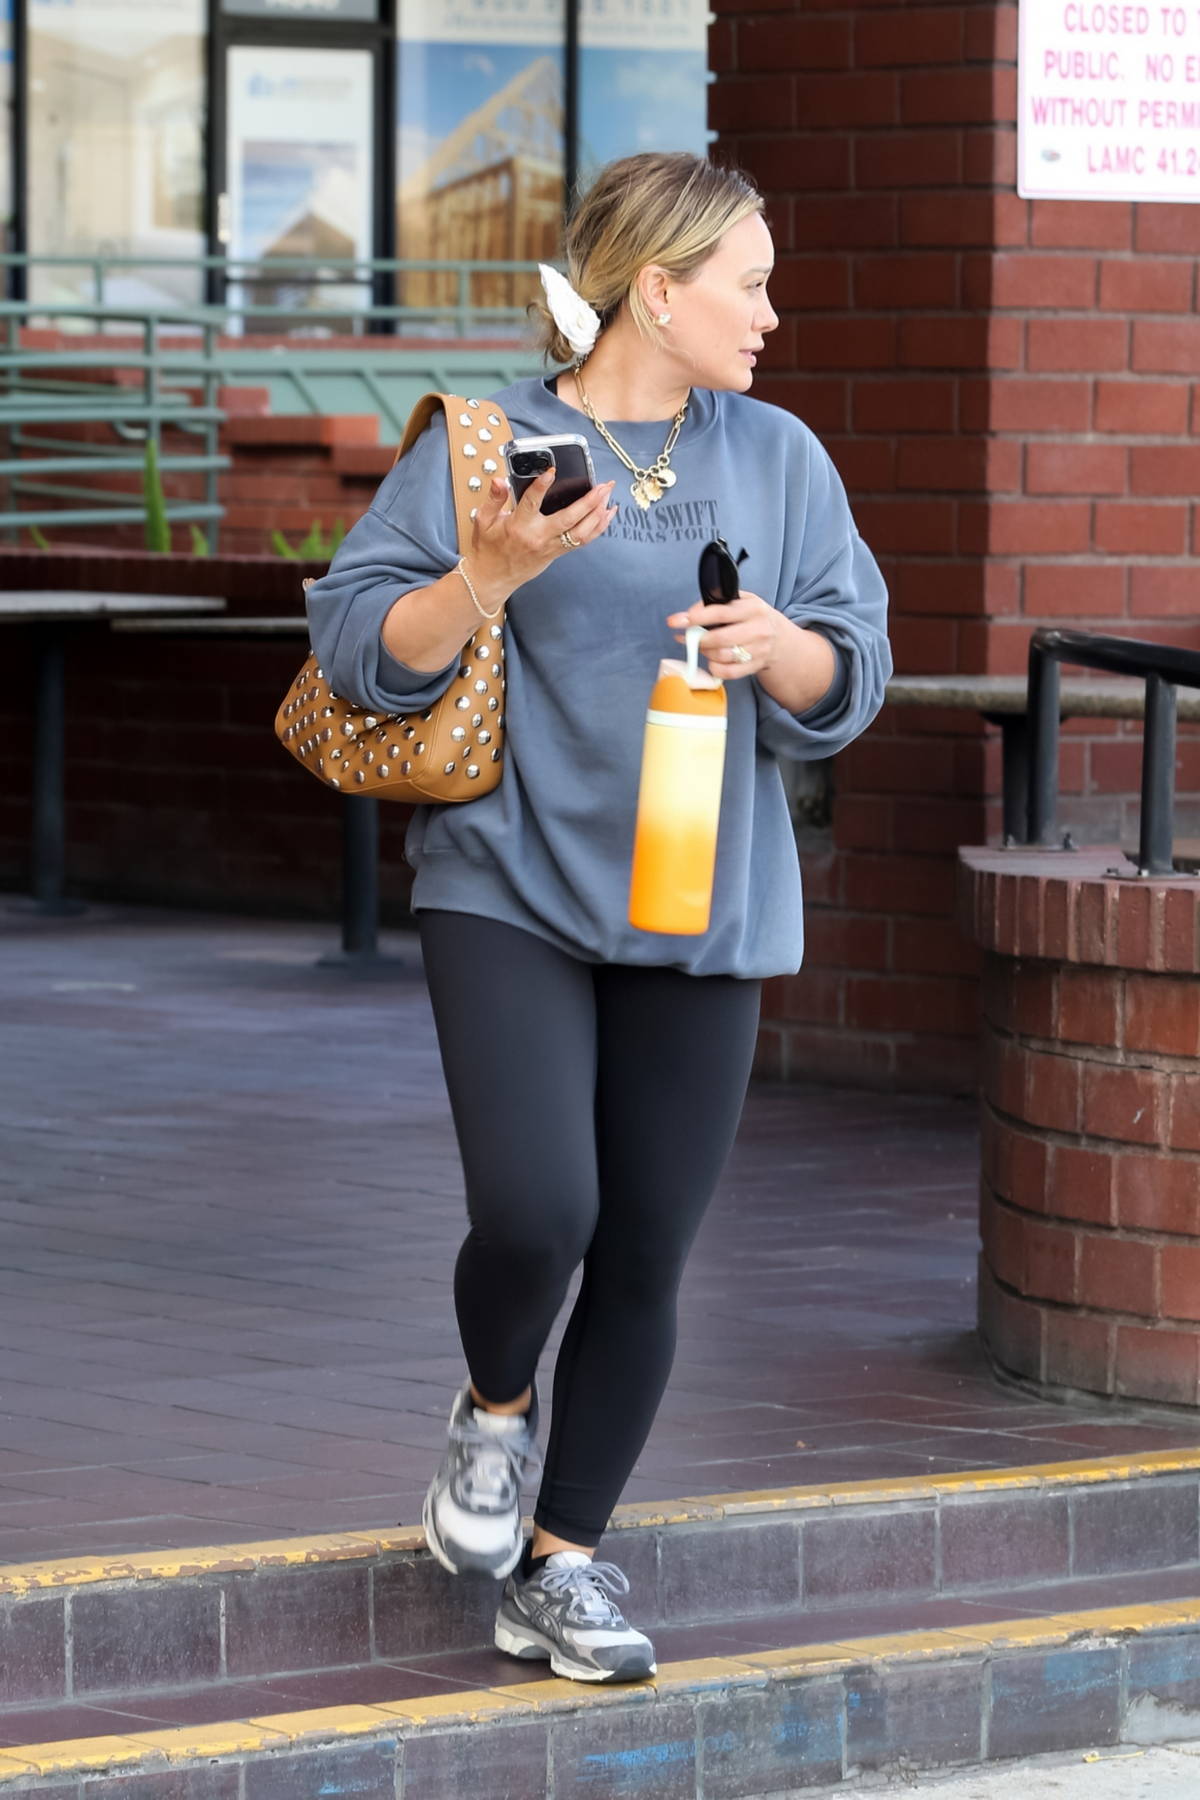 Hilary Duff sports a black top and leggings as she heads to the